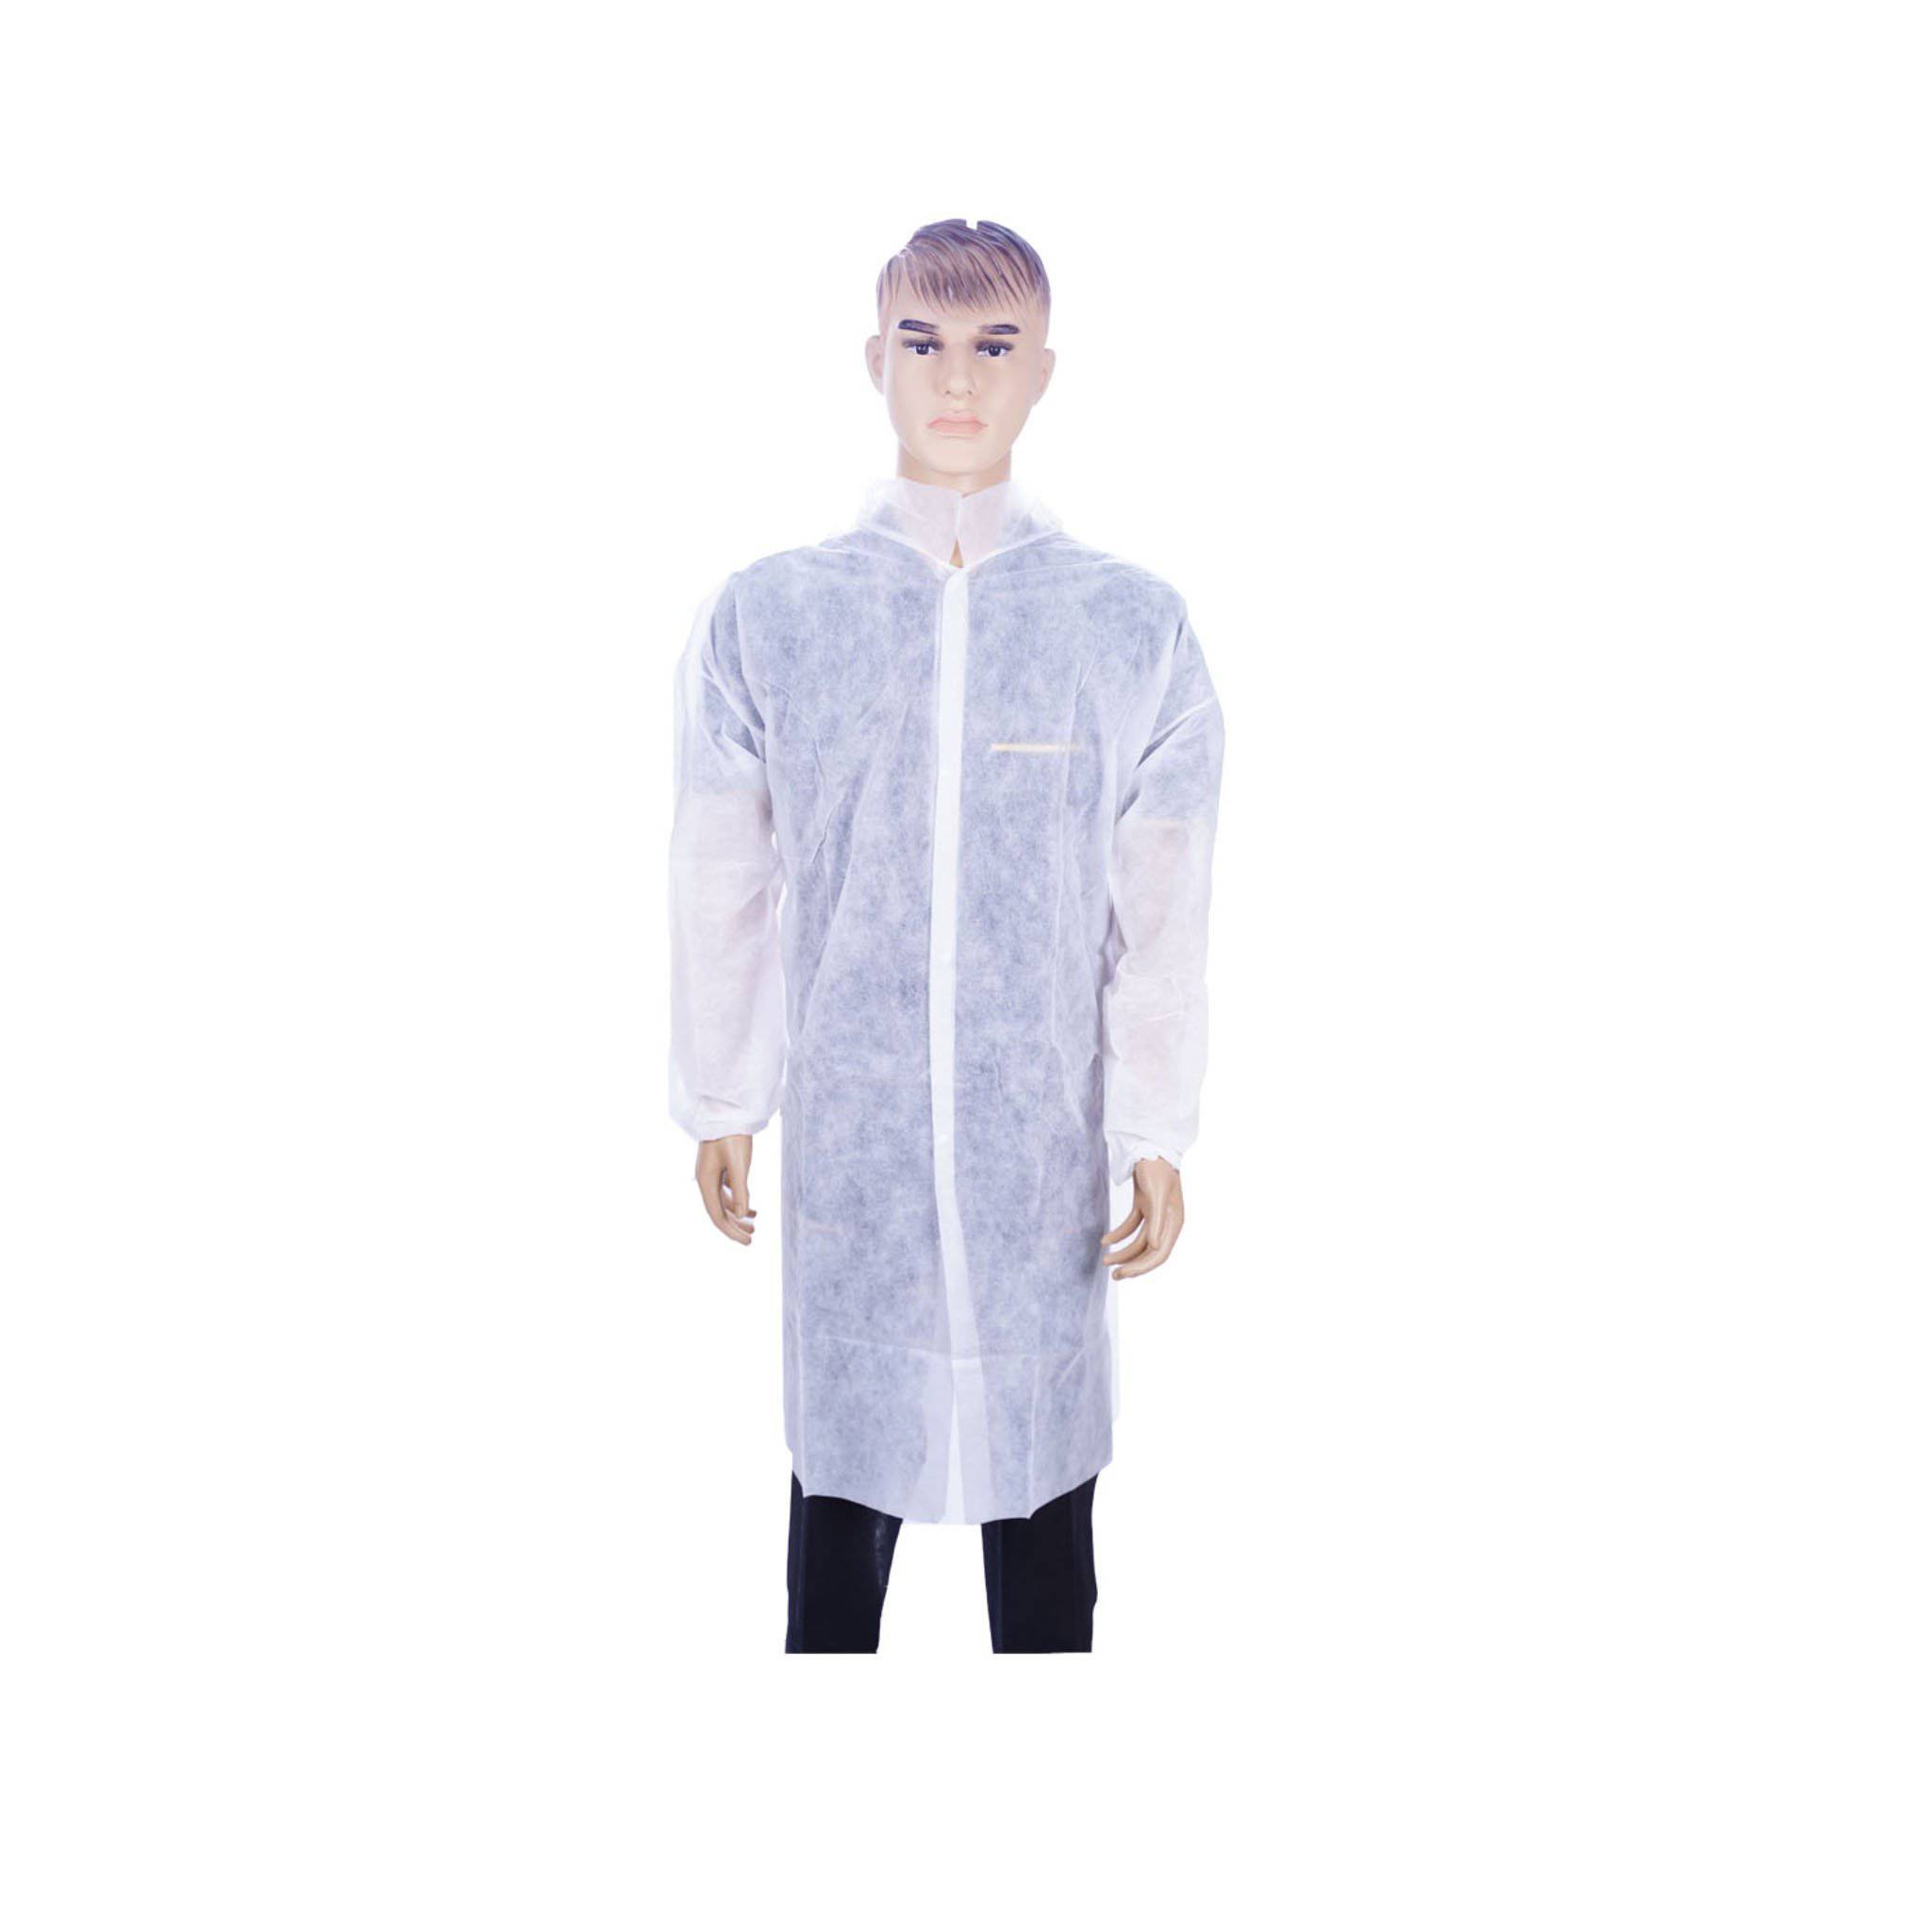 Hotpack | Non Woven Visitor Coat White Color Large   | 50 Pieces - Hotpack Global